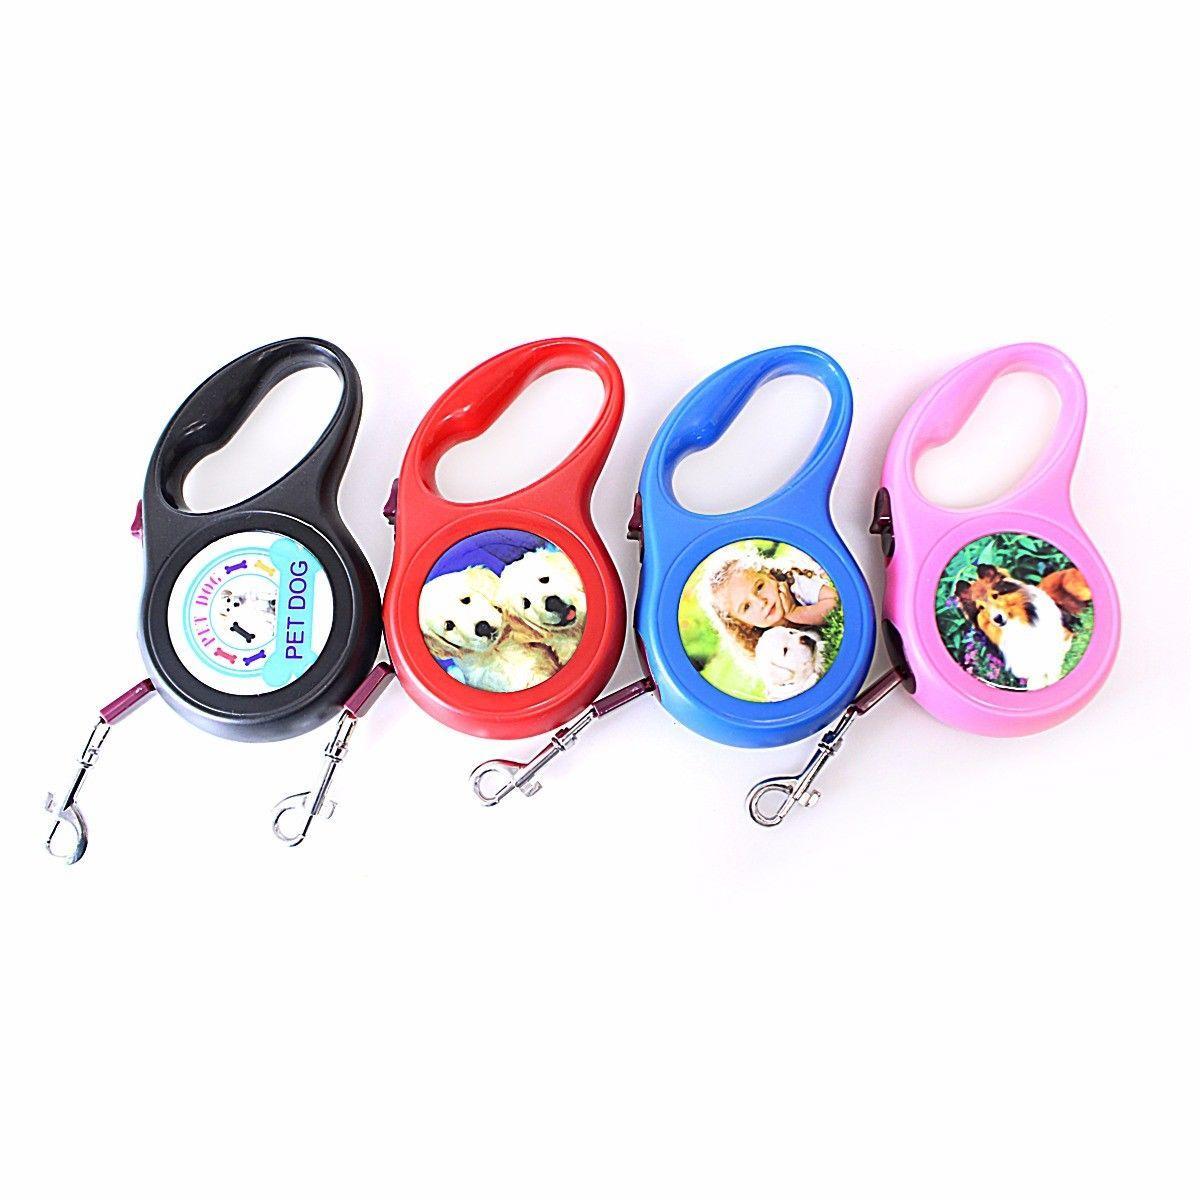 Retractable Dog Pet Lead Training Walking Leash 3m Assorted Designs and Colours 4607 (Parcel Rate)